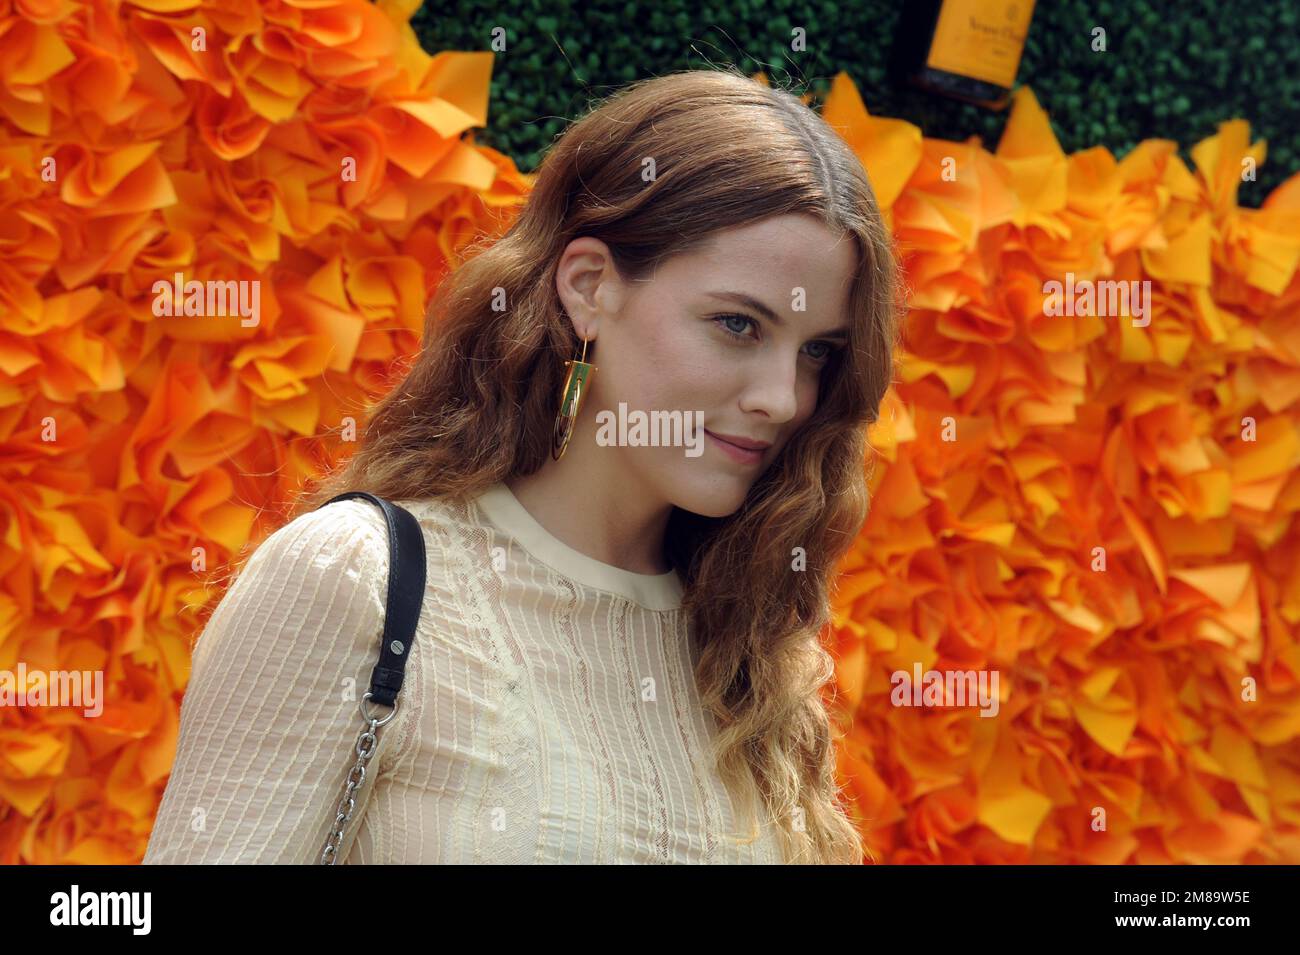 JERSEY CITY, NJ - JUNE 04: Riley Keough attends 9th Annual Veuve Clicquot Polo Classic at Liberty State Park on June 4, 2016 in Jersey City, New Jersey.  People:  Riley Keough Stock Photo